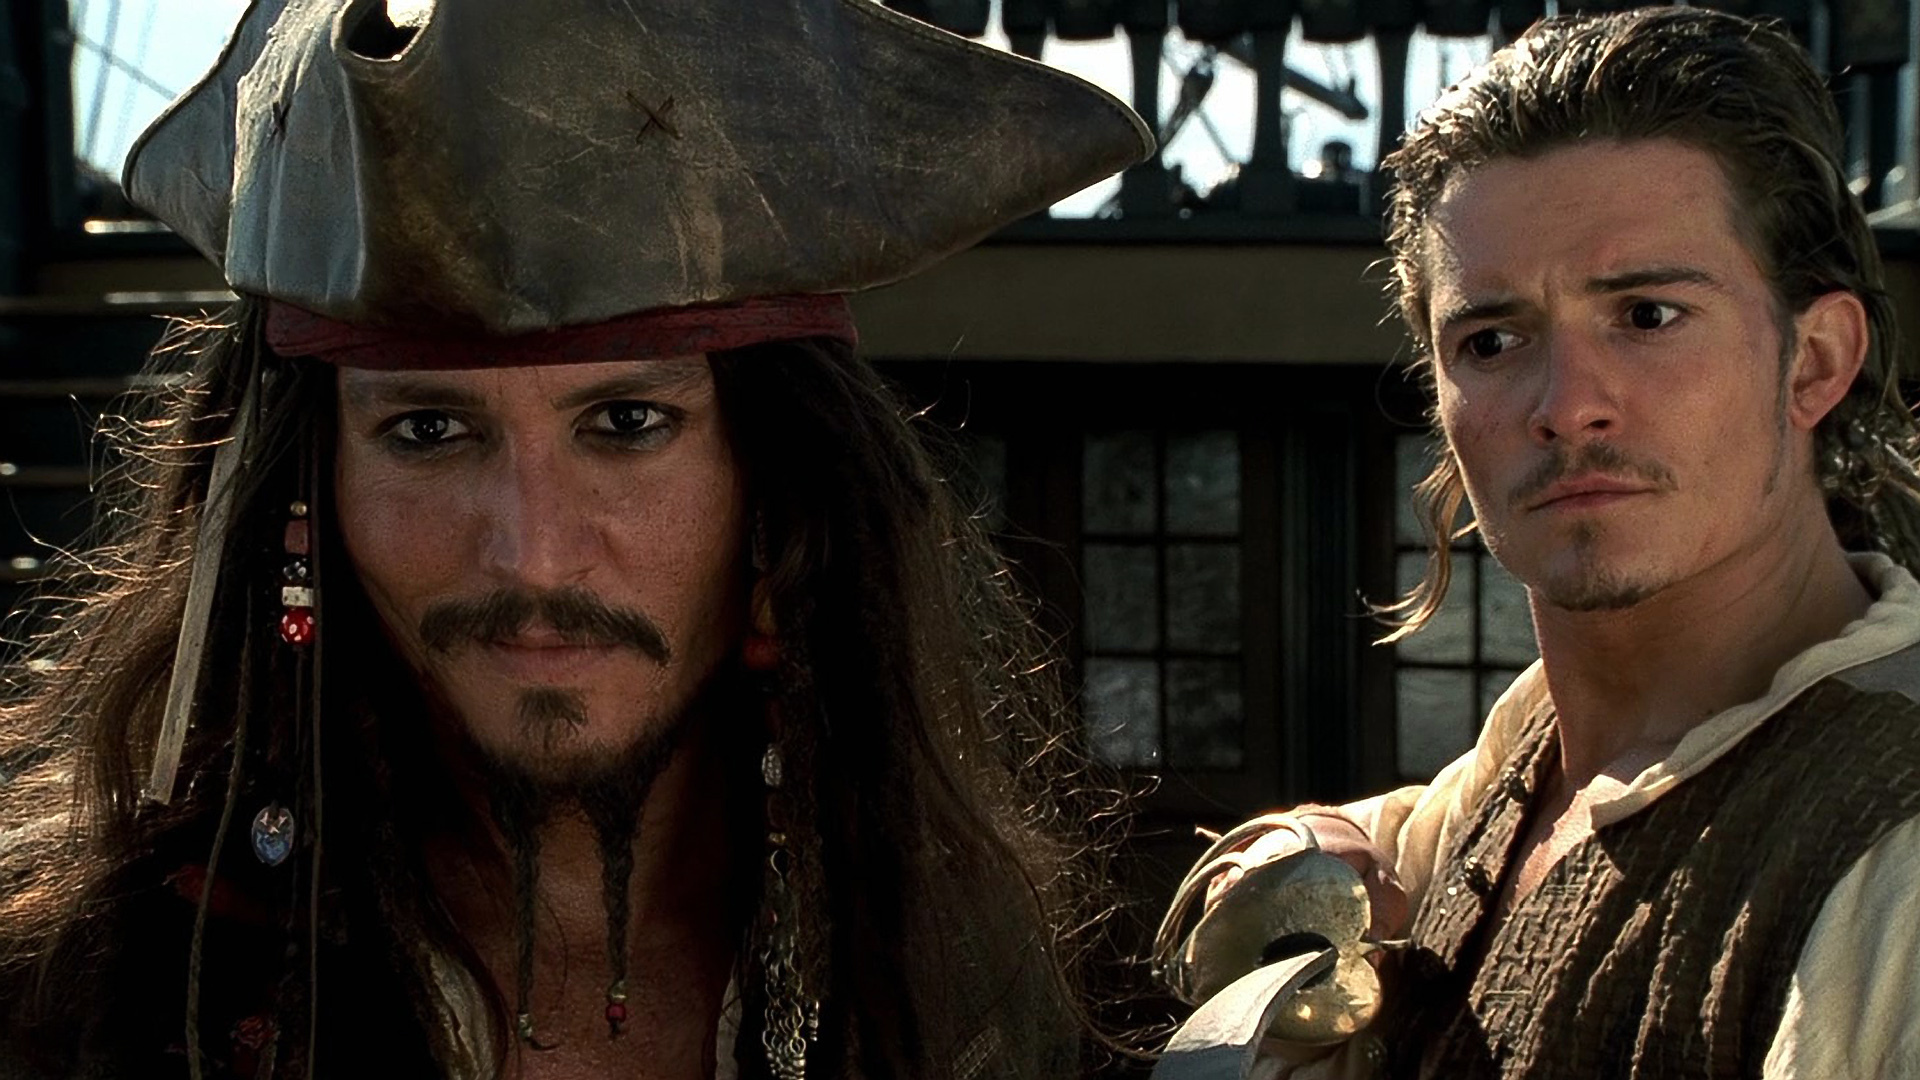 pirates of the caribbean: the curse of the black pearl, movie, jack sparrow, johnny depp, orlando bloom, will turner, pirates of the caribbean